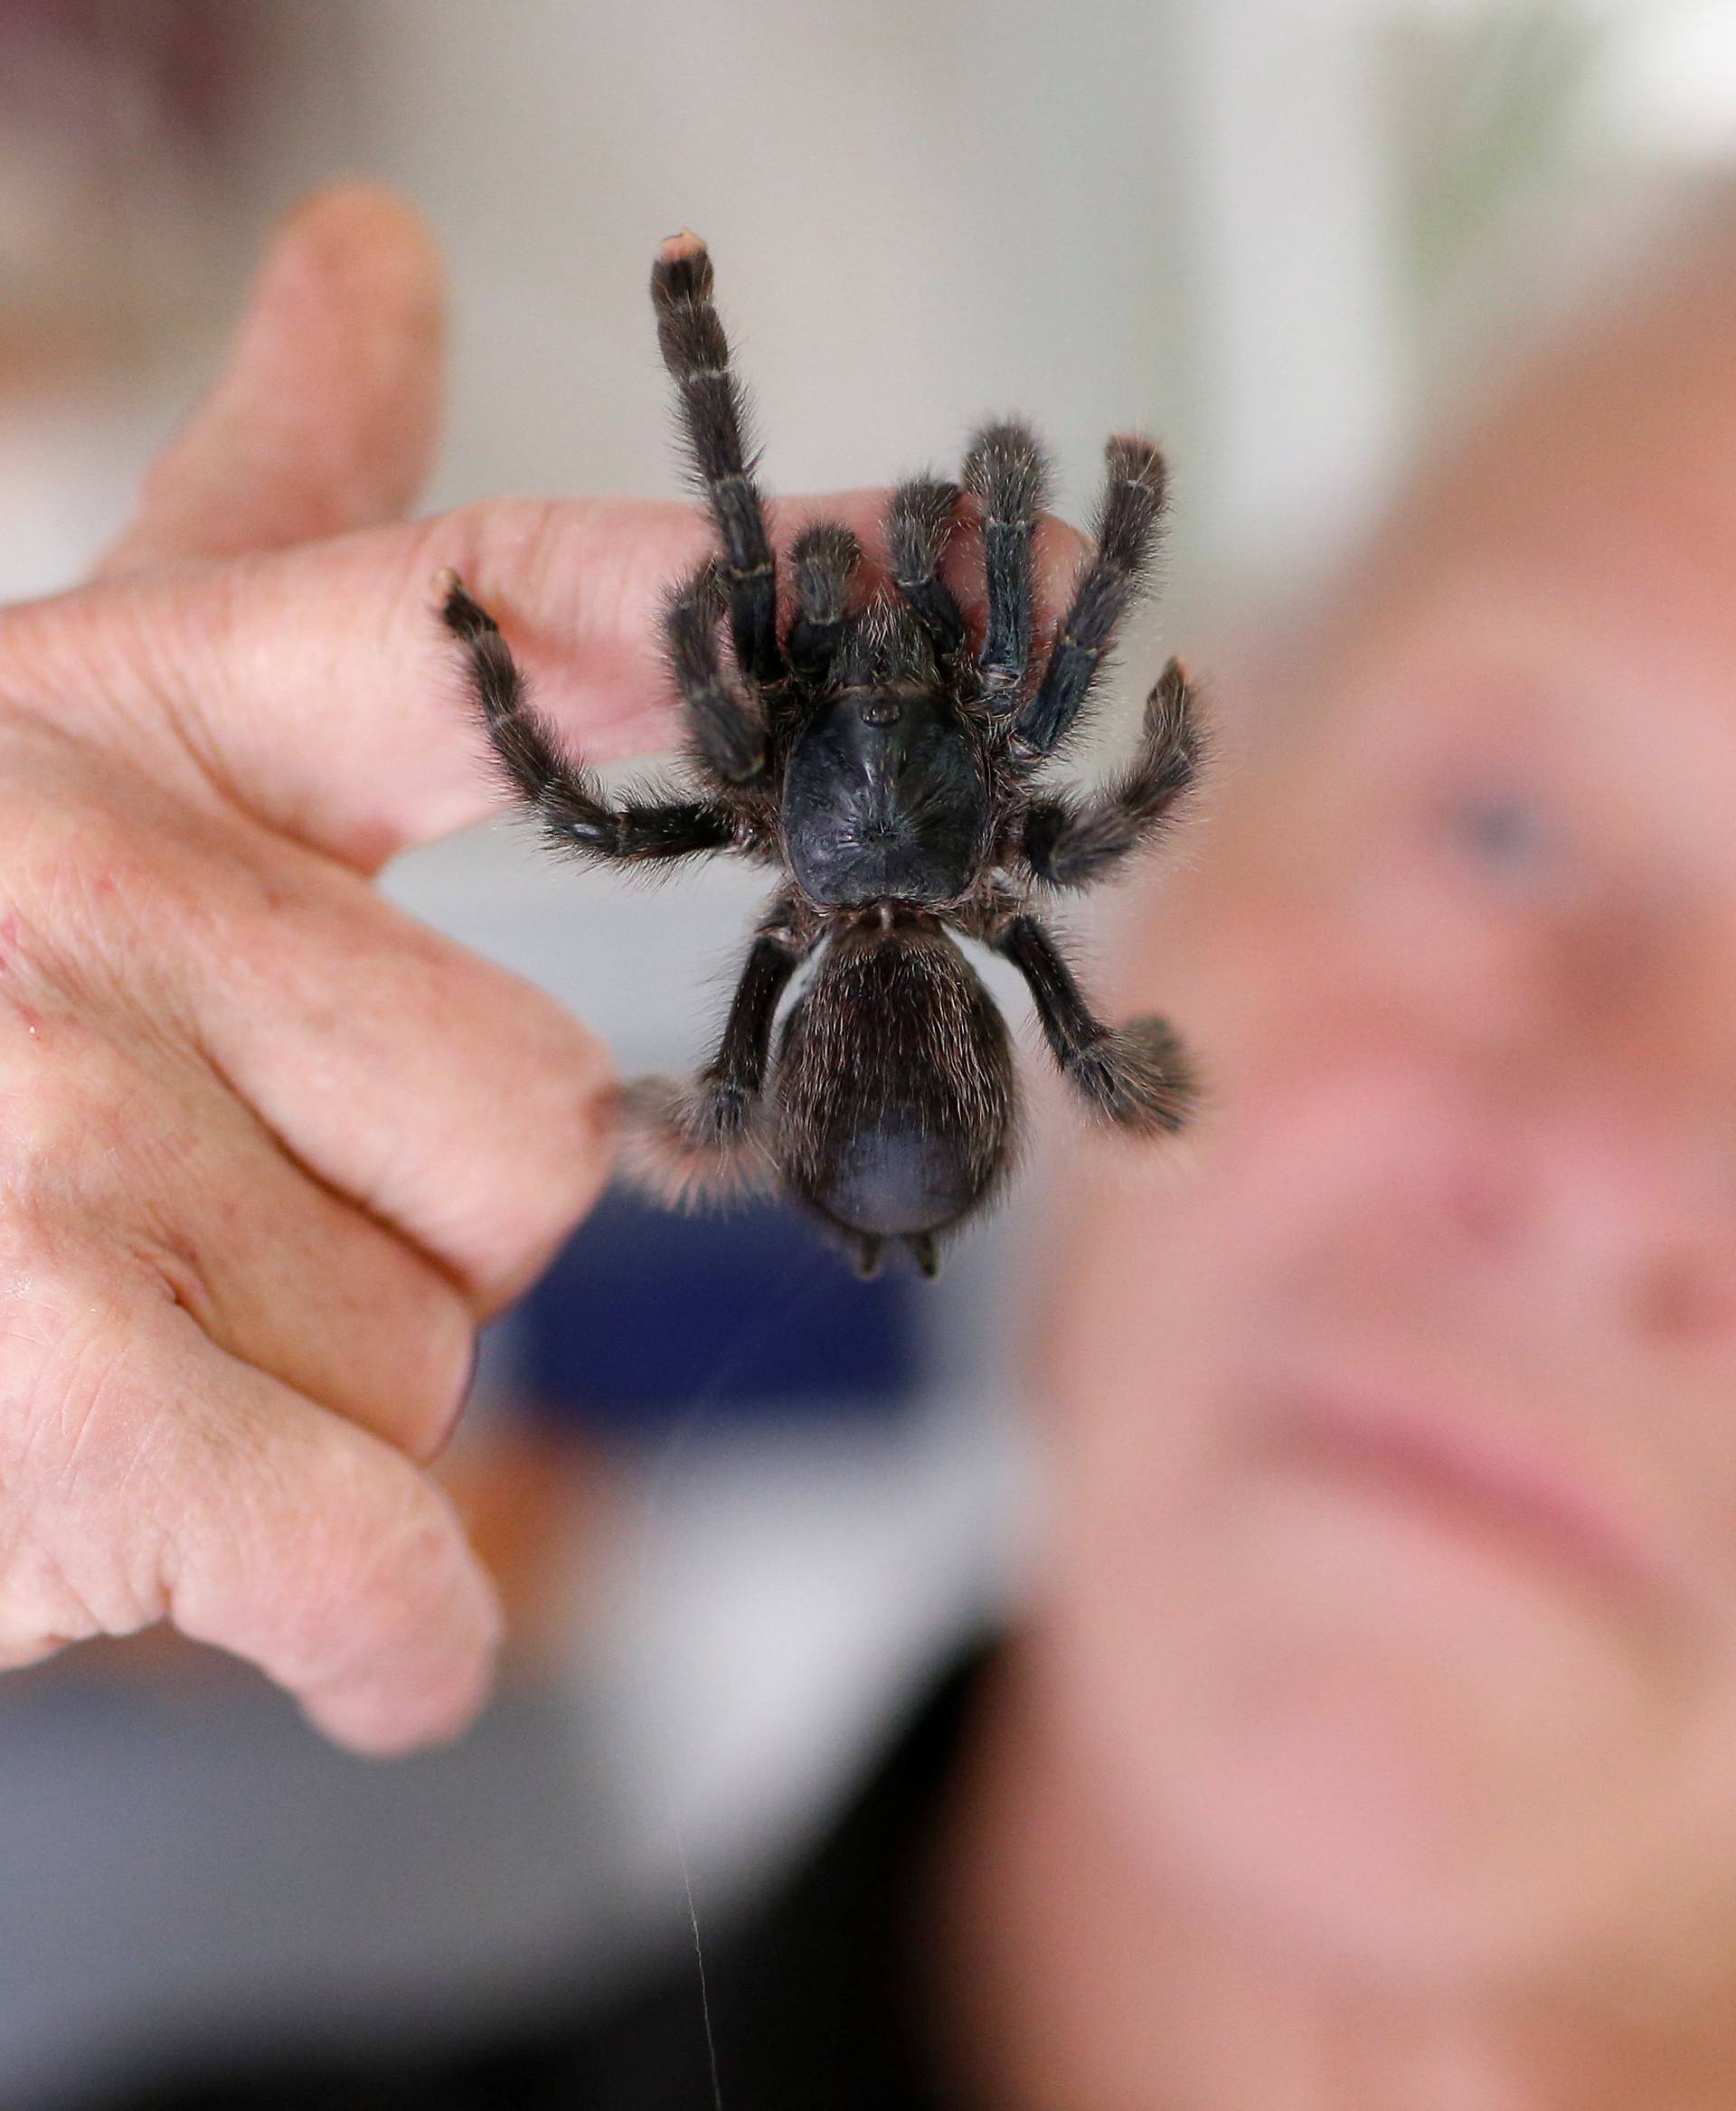 Philippe Gillet, 67 year-old Frenchman who lives with more than 400 reptiles and tamed alligators, looks at a tarantula in his house in Coueron near Nantes